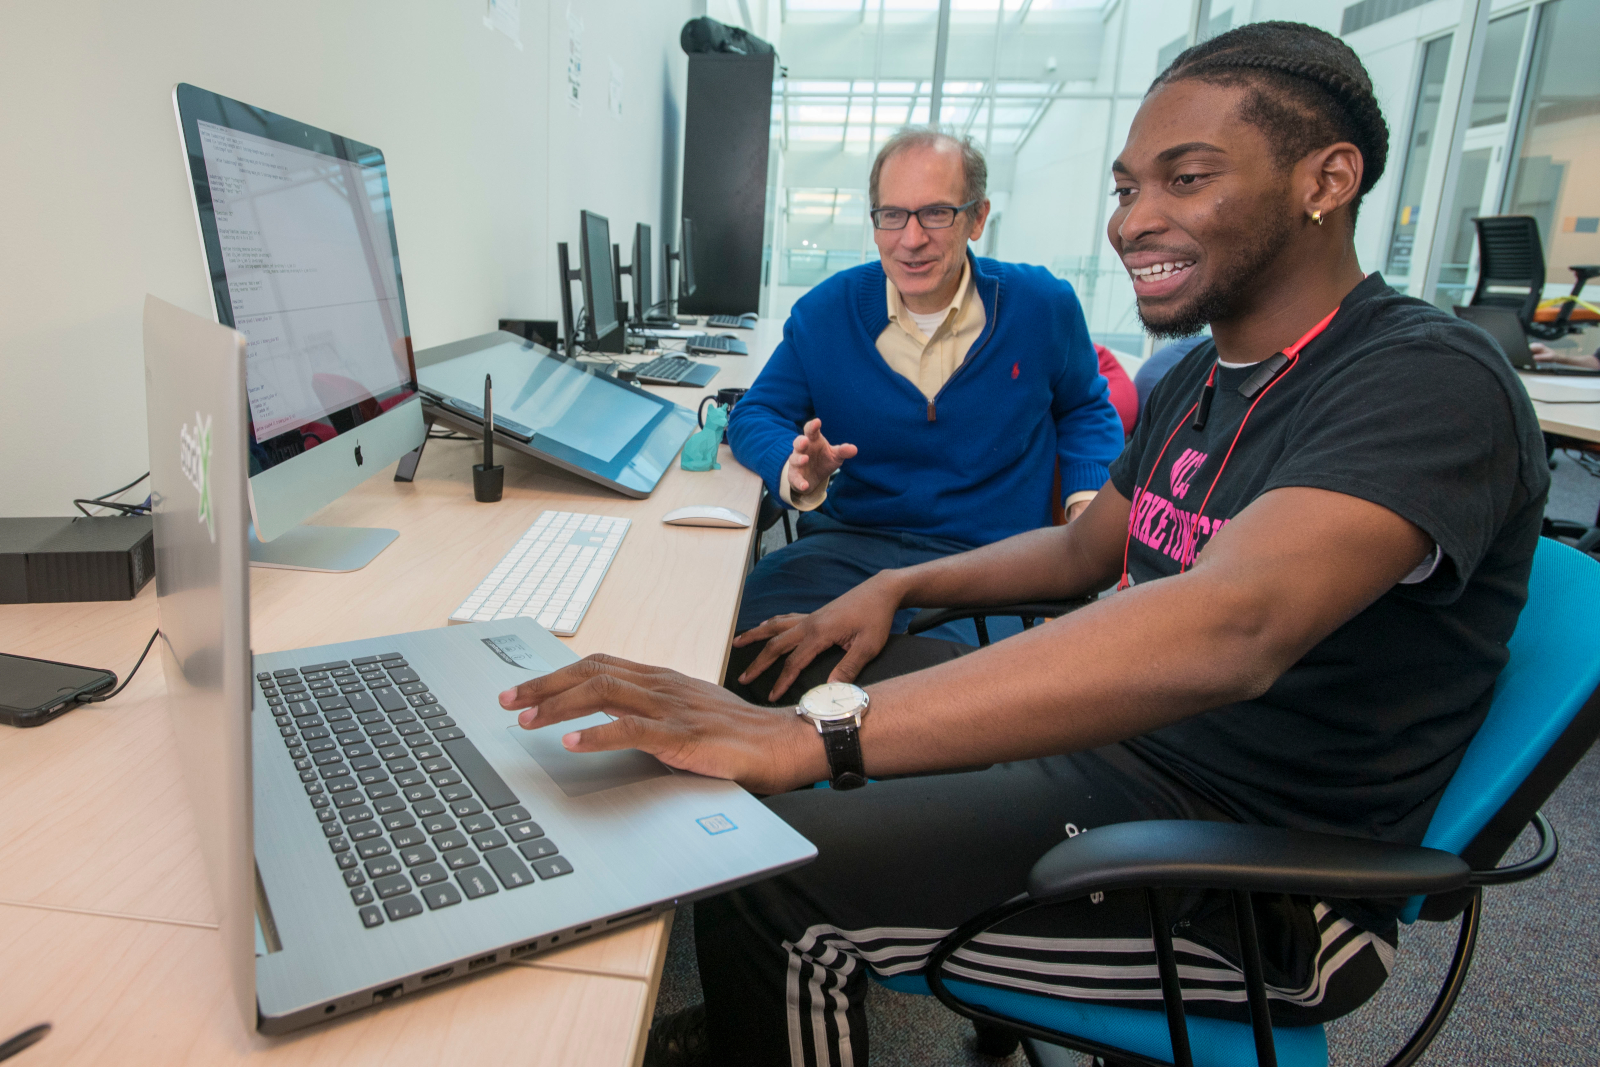 Professor Phillip Bradford meeting with a student about his computer science project at Uconn Stamford on Oct. 17, 2018. (Sean Flynn/UConn Photo)